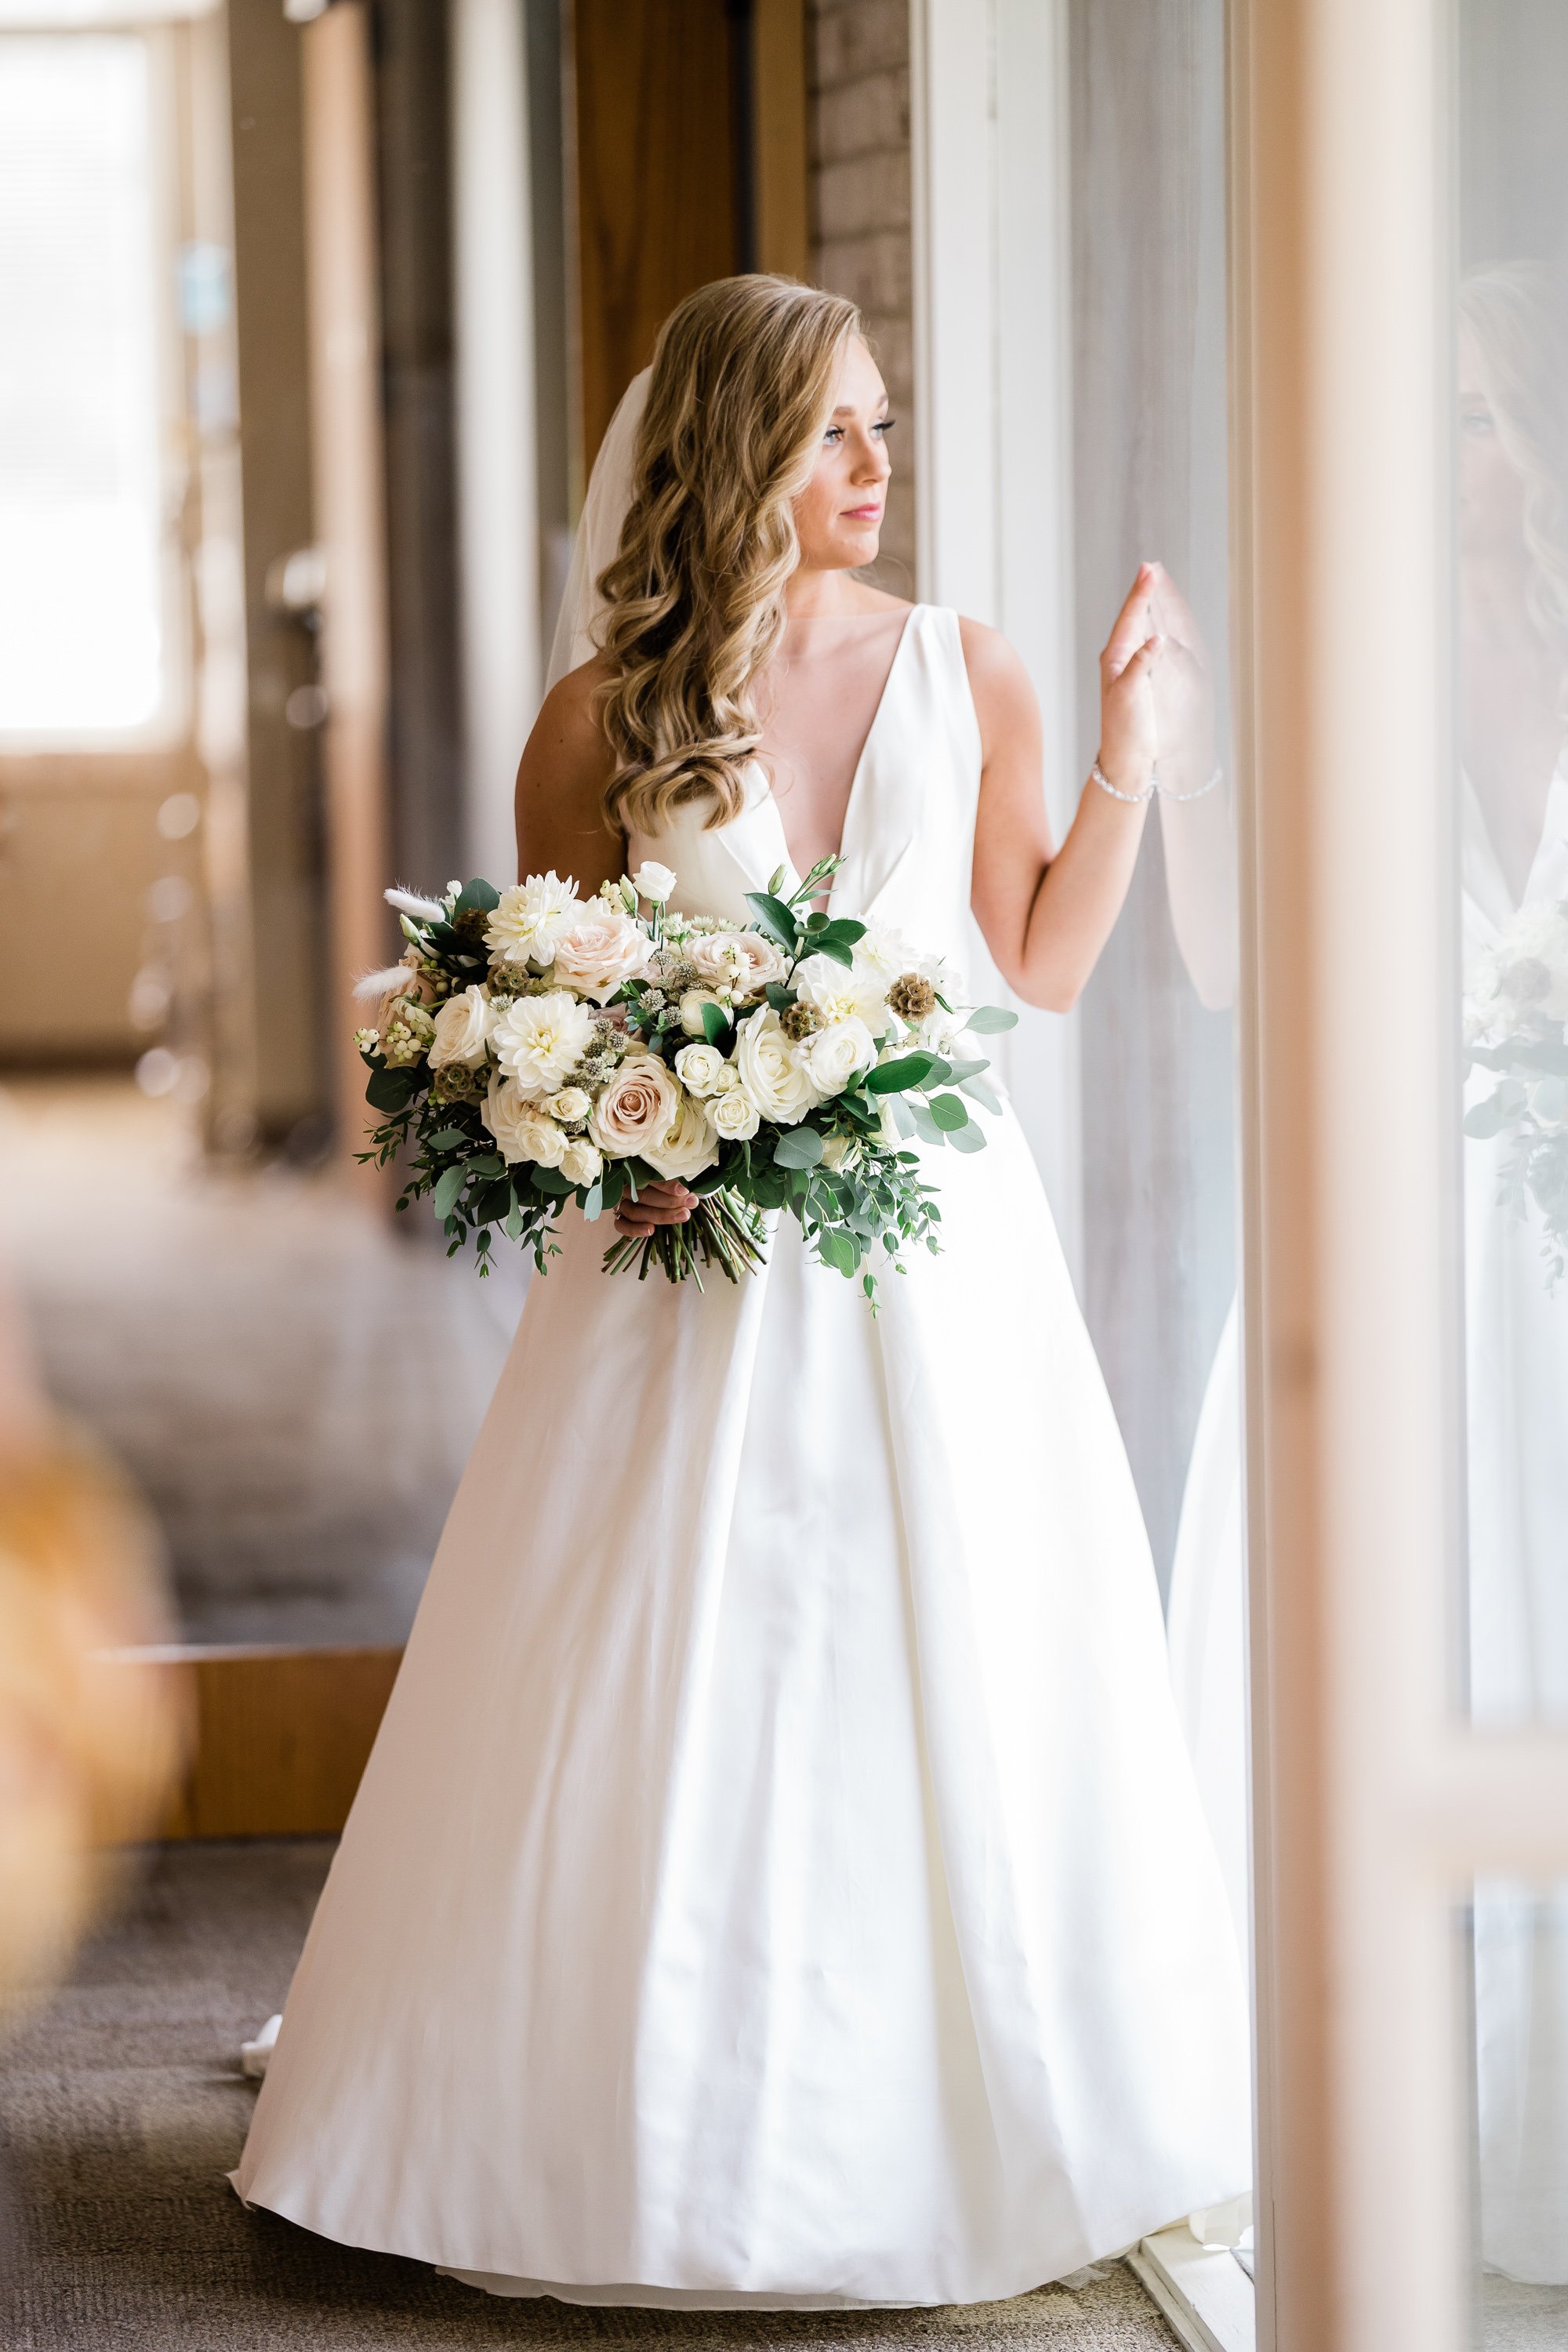 Fort Wayne bride in a satin wedding gown holding a white floral bouquet looks over a balcony for her bridal portraits taken by Fort Wayne wedding photographers